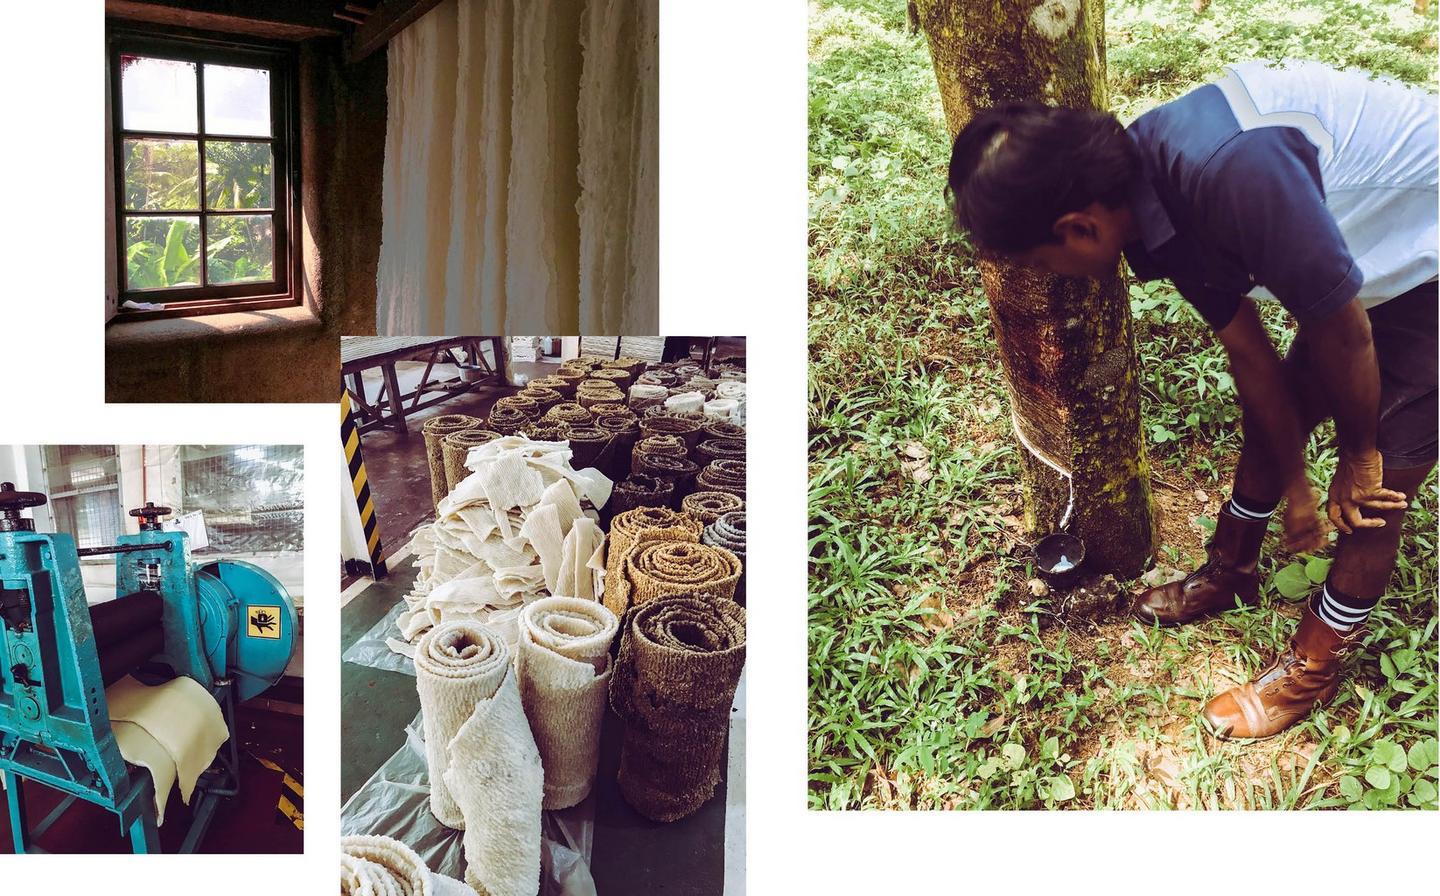 A man working at a rubber tree plantation and pure rubber being manufactured.